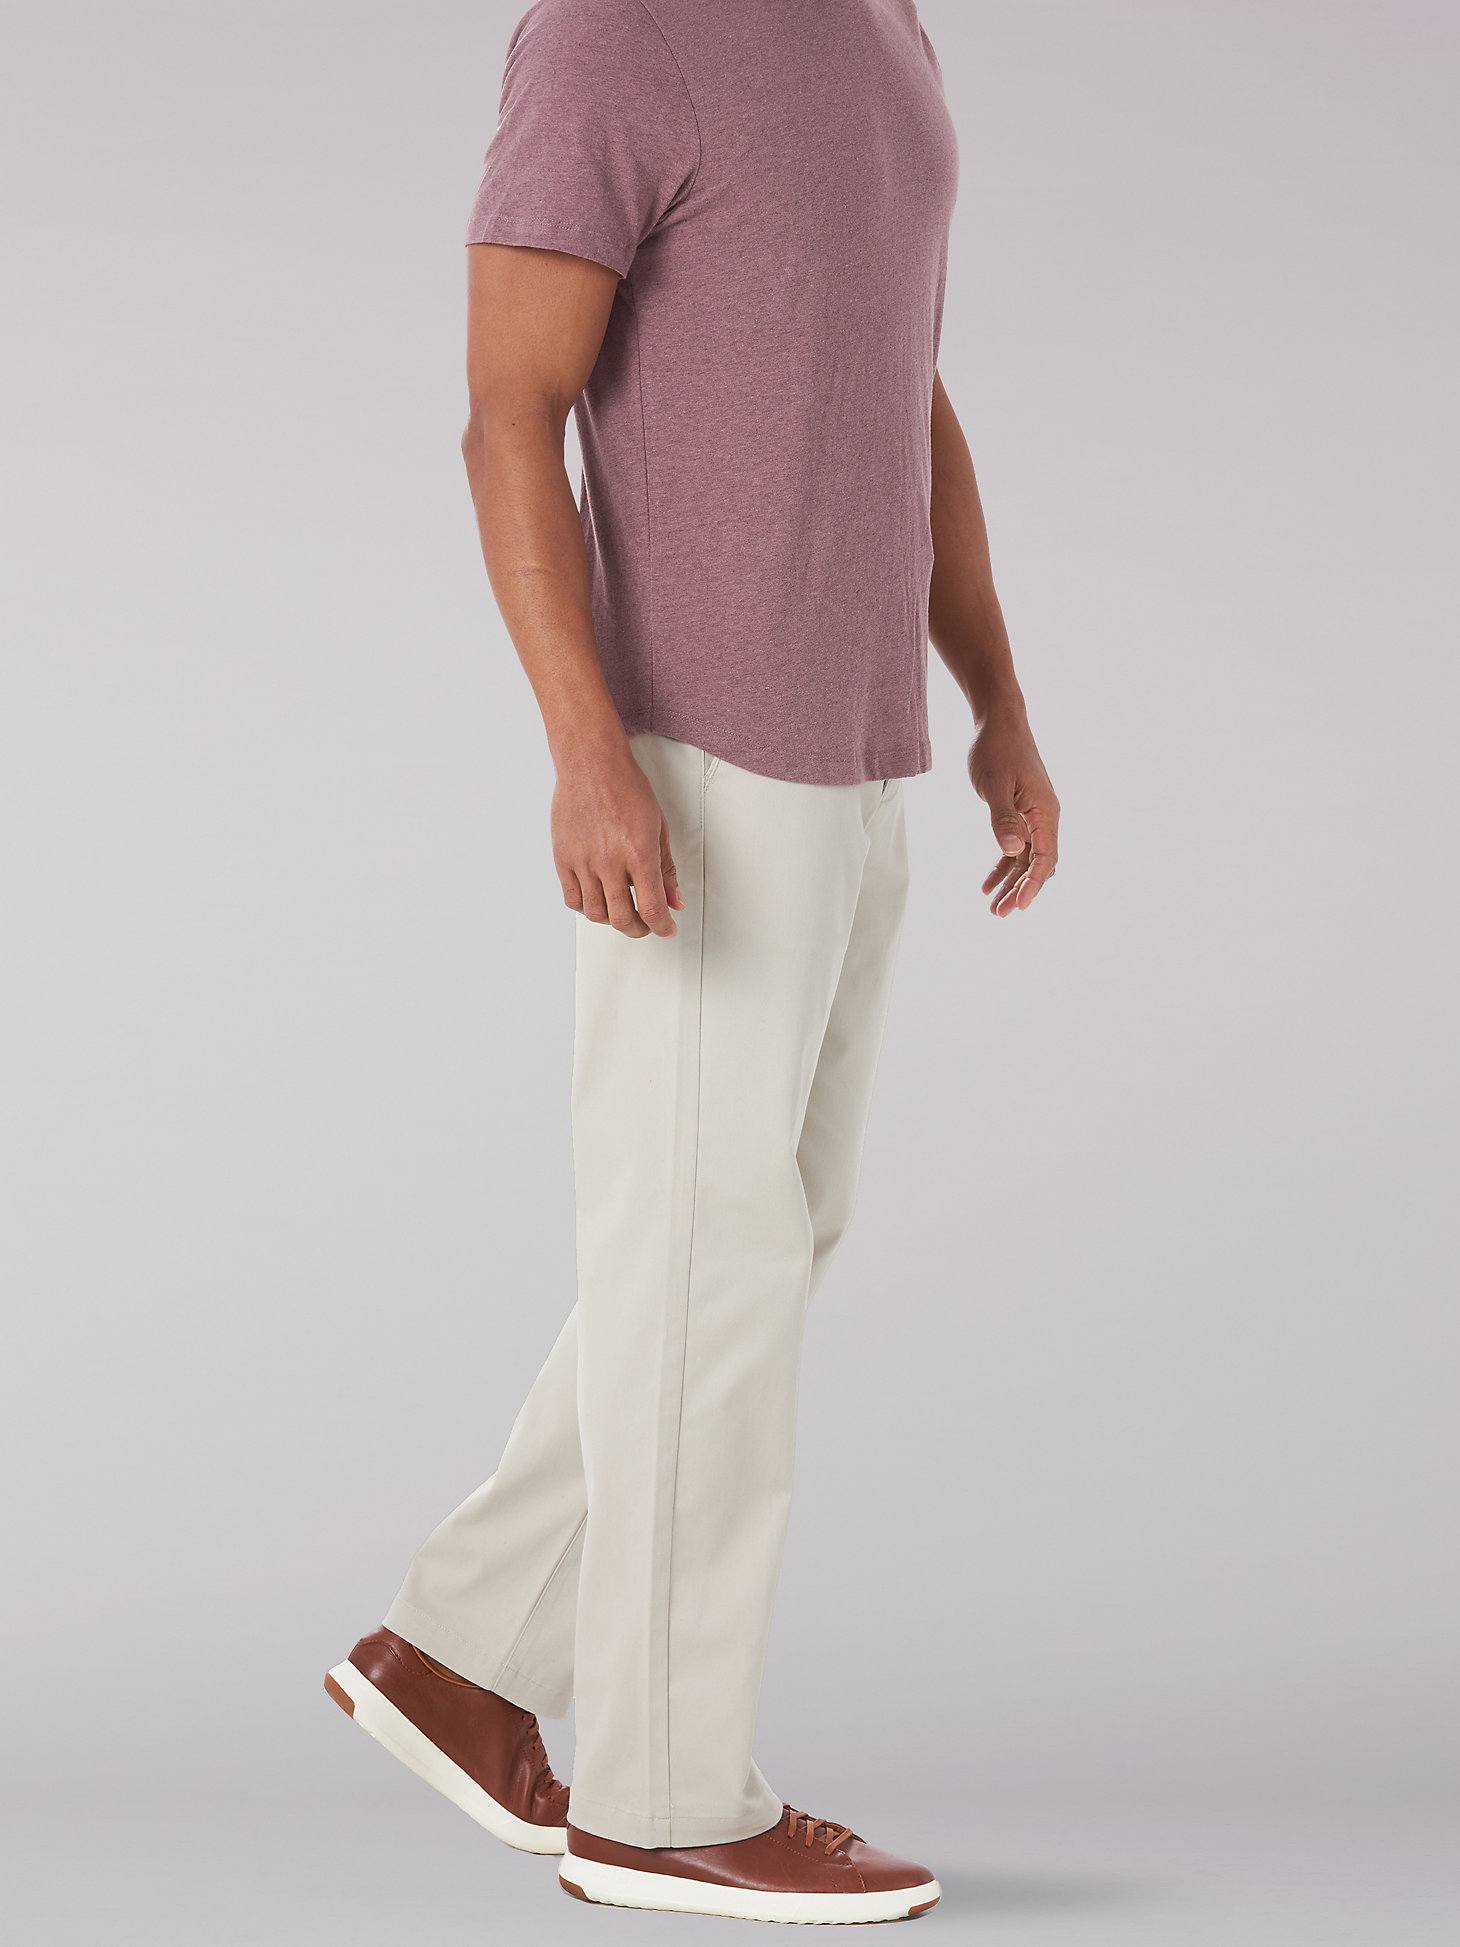 Men's Extreme Comfort MVP Straight Fit Flat Front Pant in Salina Stone alternative view 2